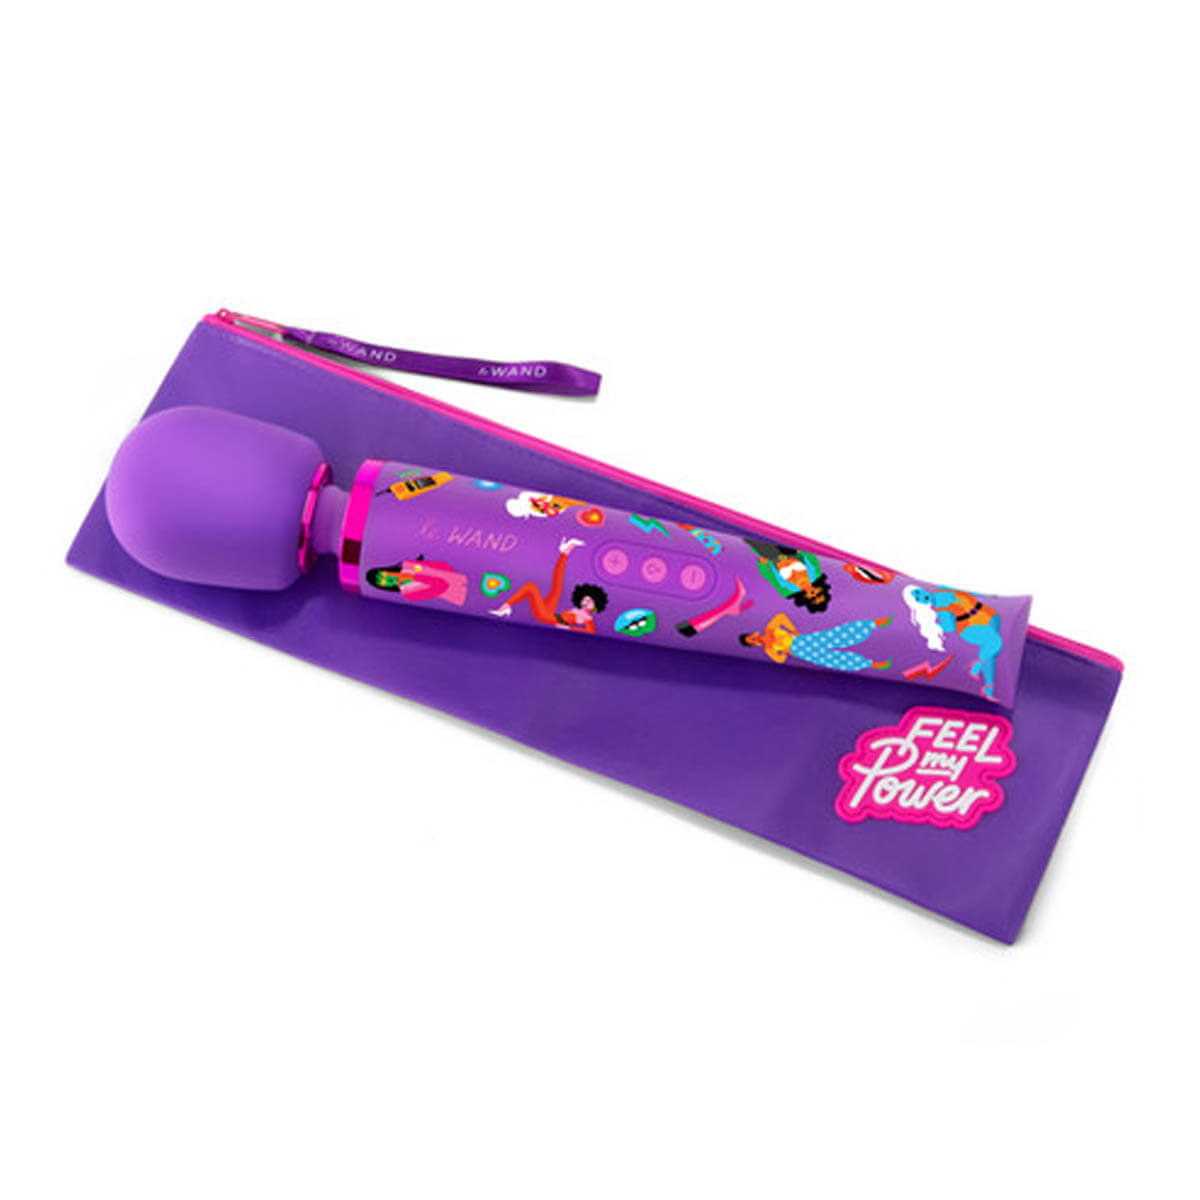 Le Wand purple personal massager with empowering illustrations by artist Jade Purple Brown and its purple travel bag Nudie Co